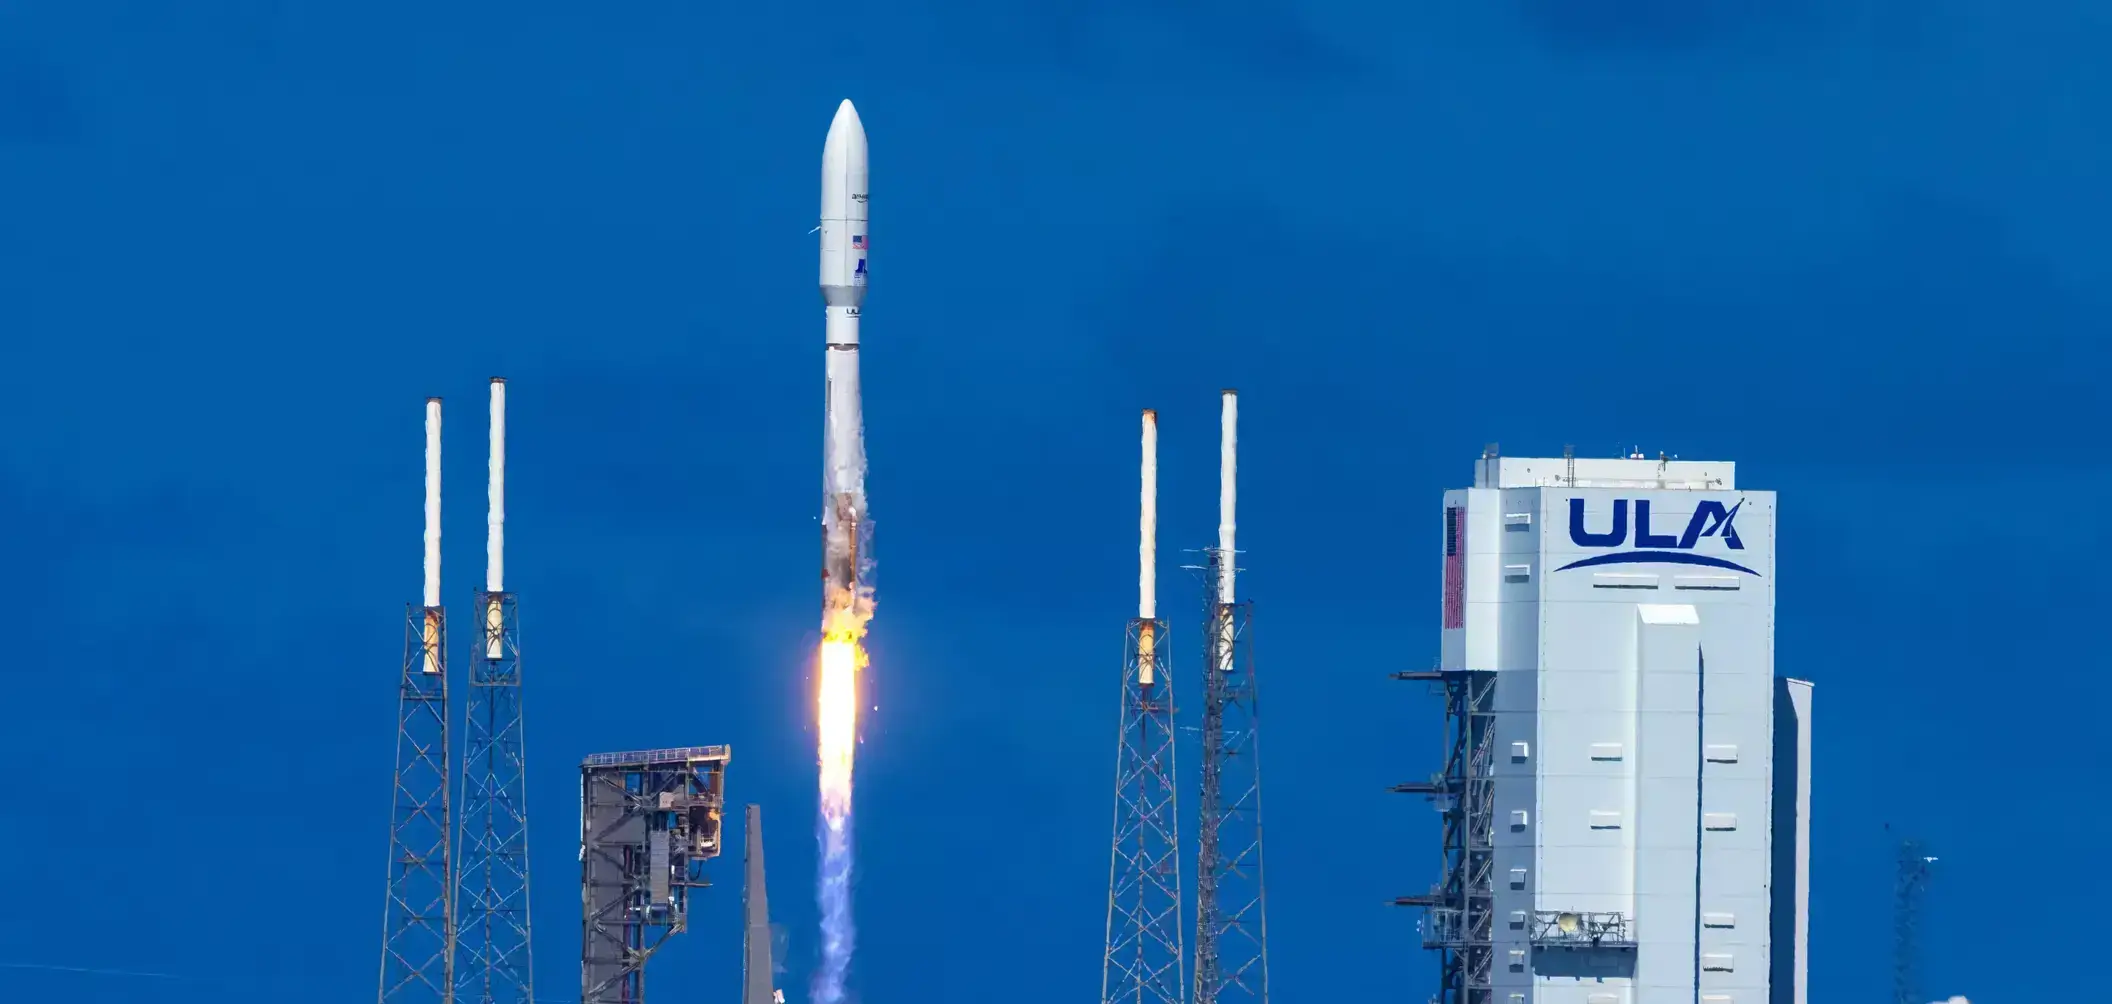 Amazon Launches First Test Satellites For Kuiper Internet System